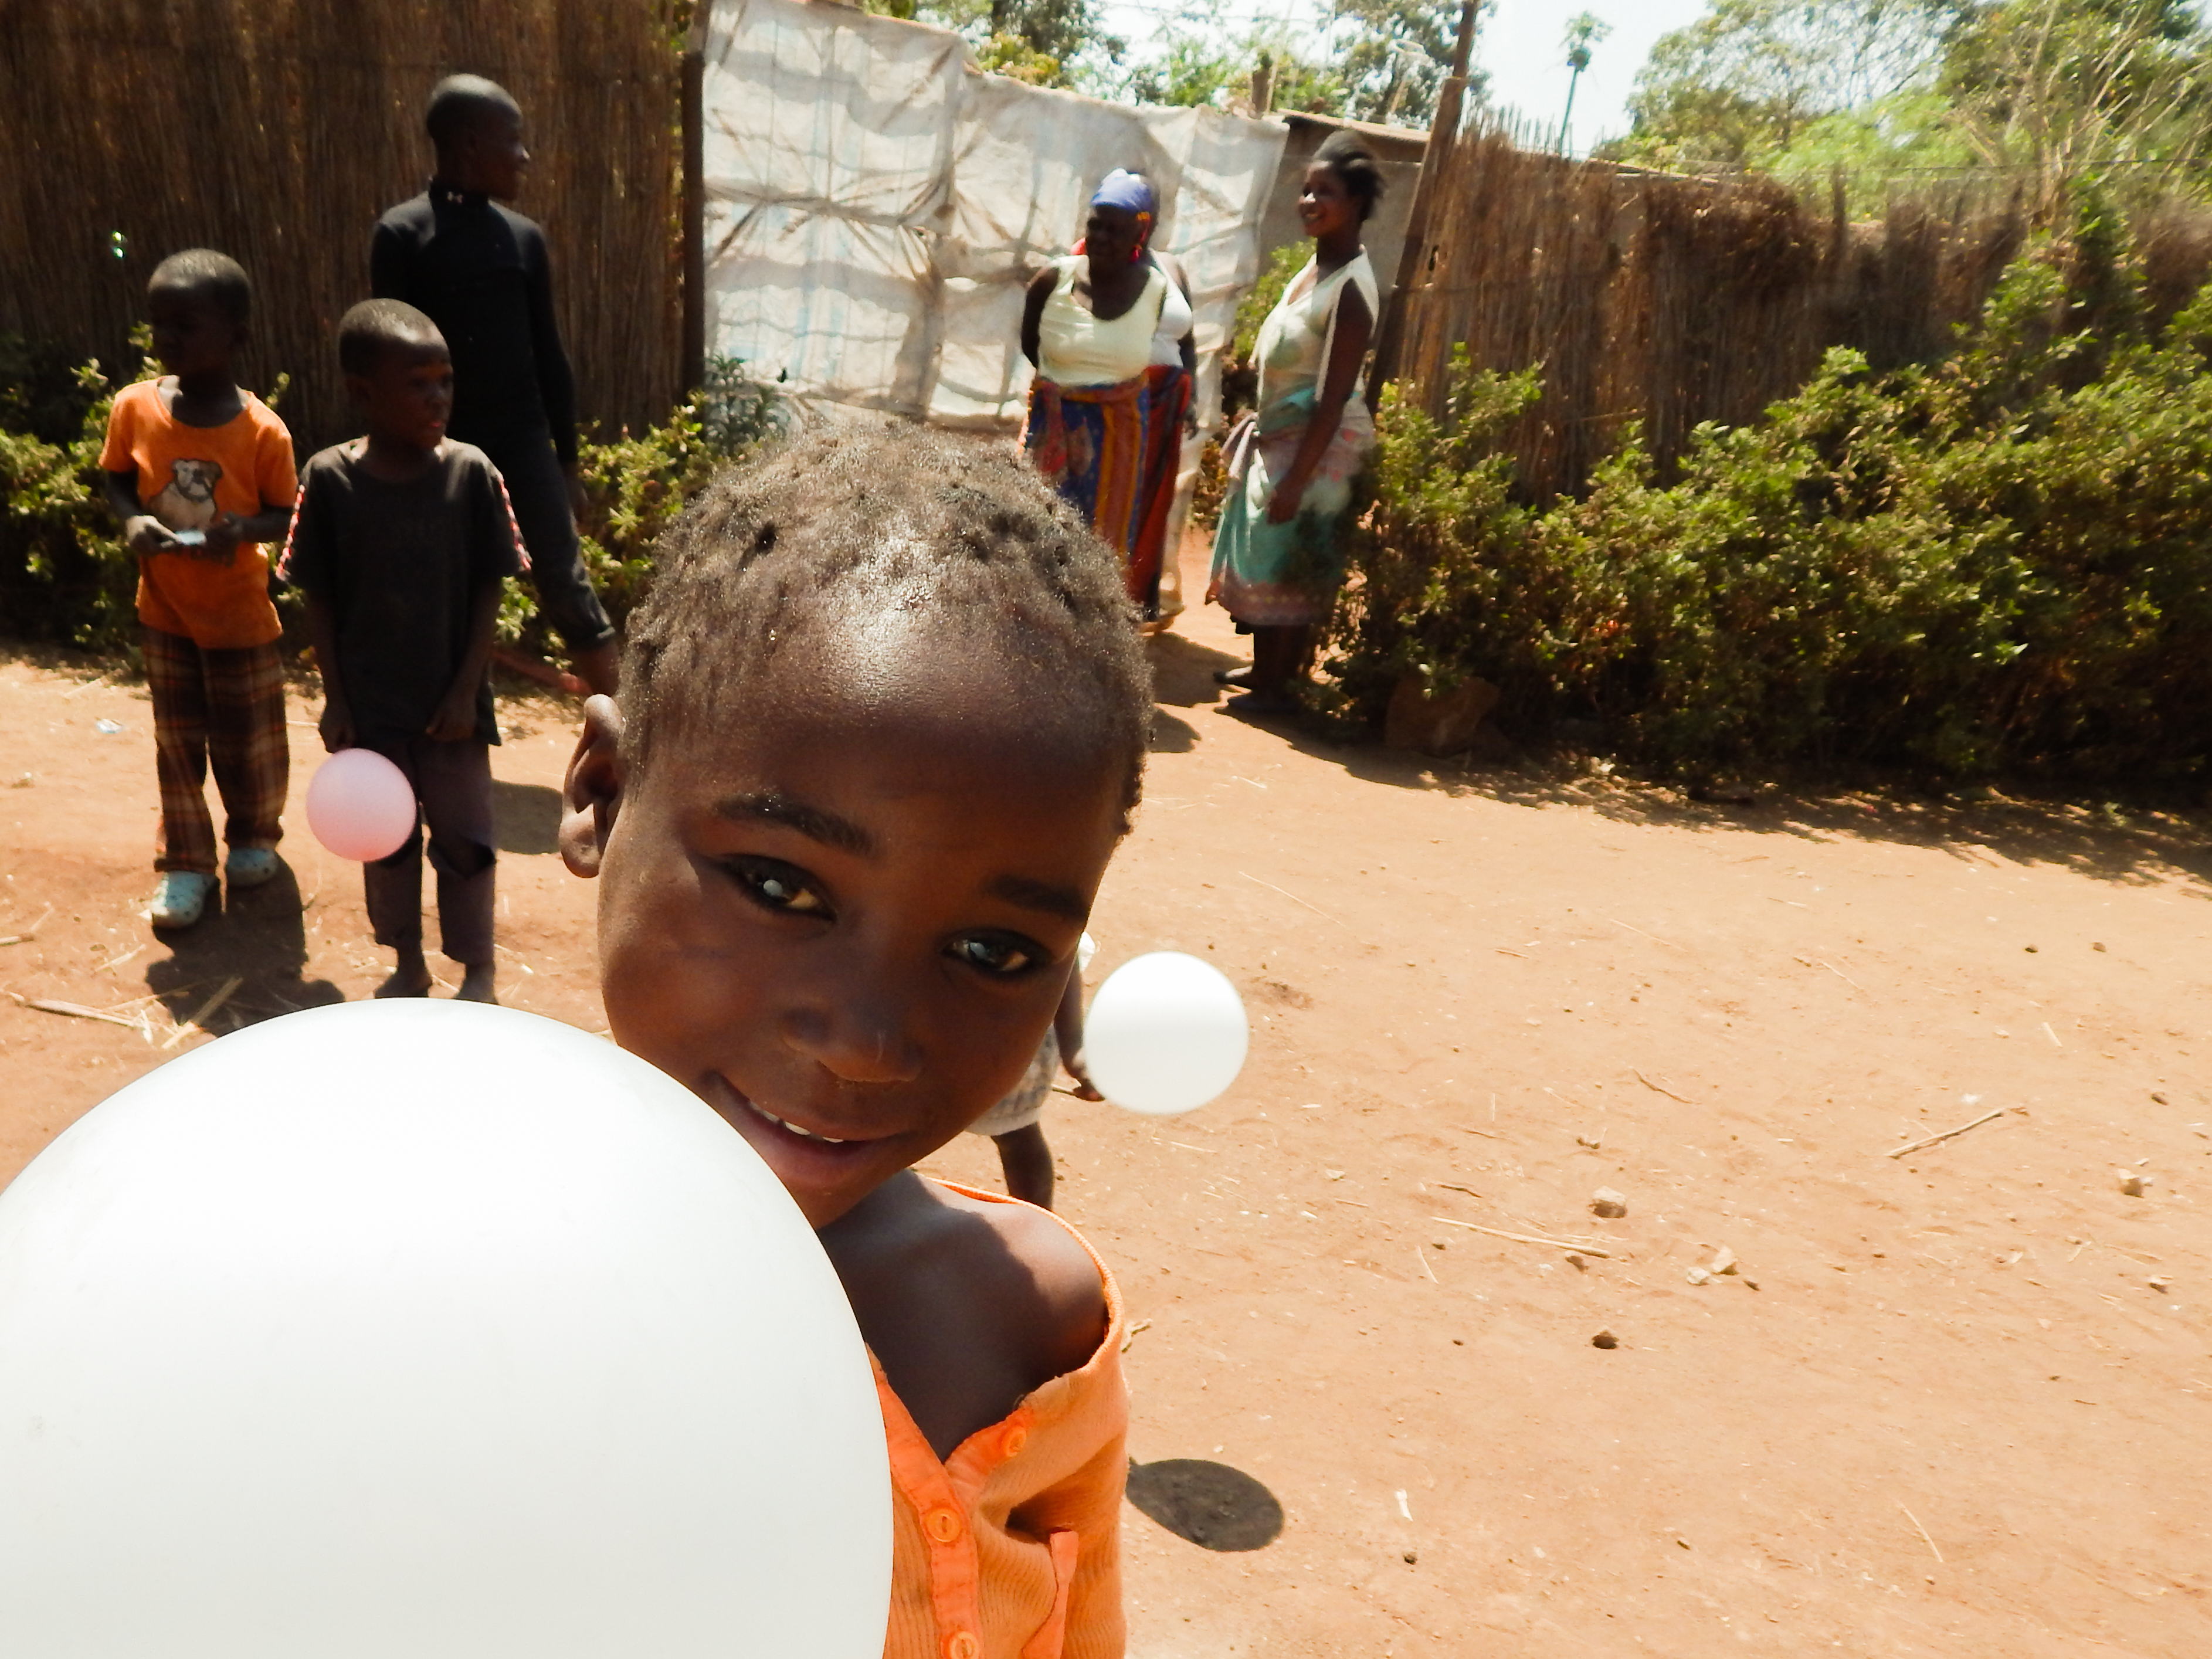 Volunteers bring balloons for children to play with during one of their breaks.